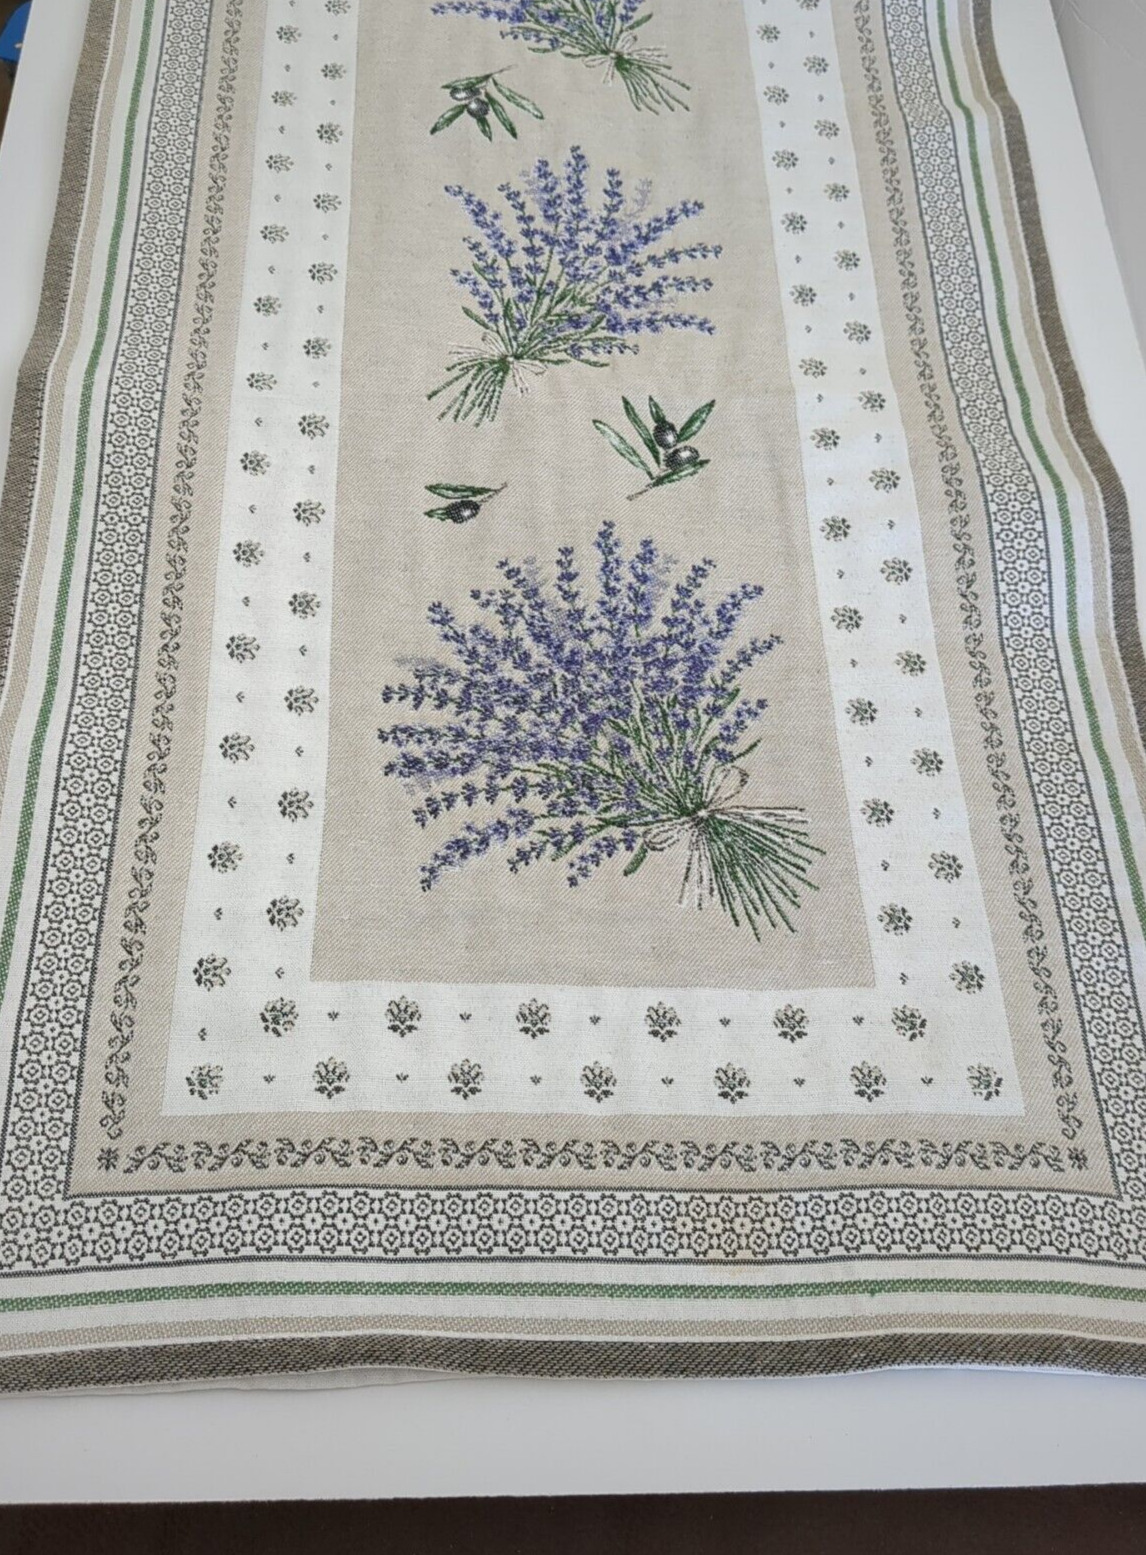 La Cigale Table Runner Provence Of France